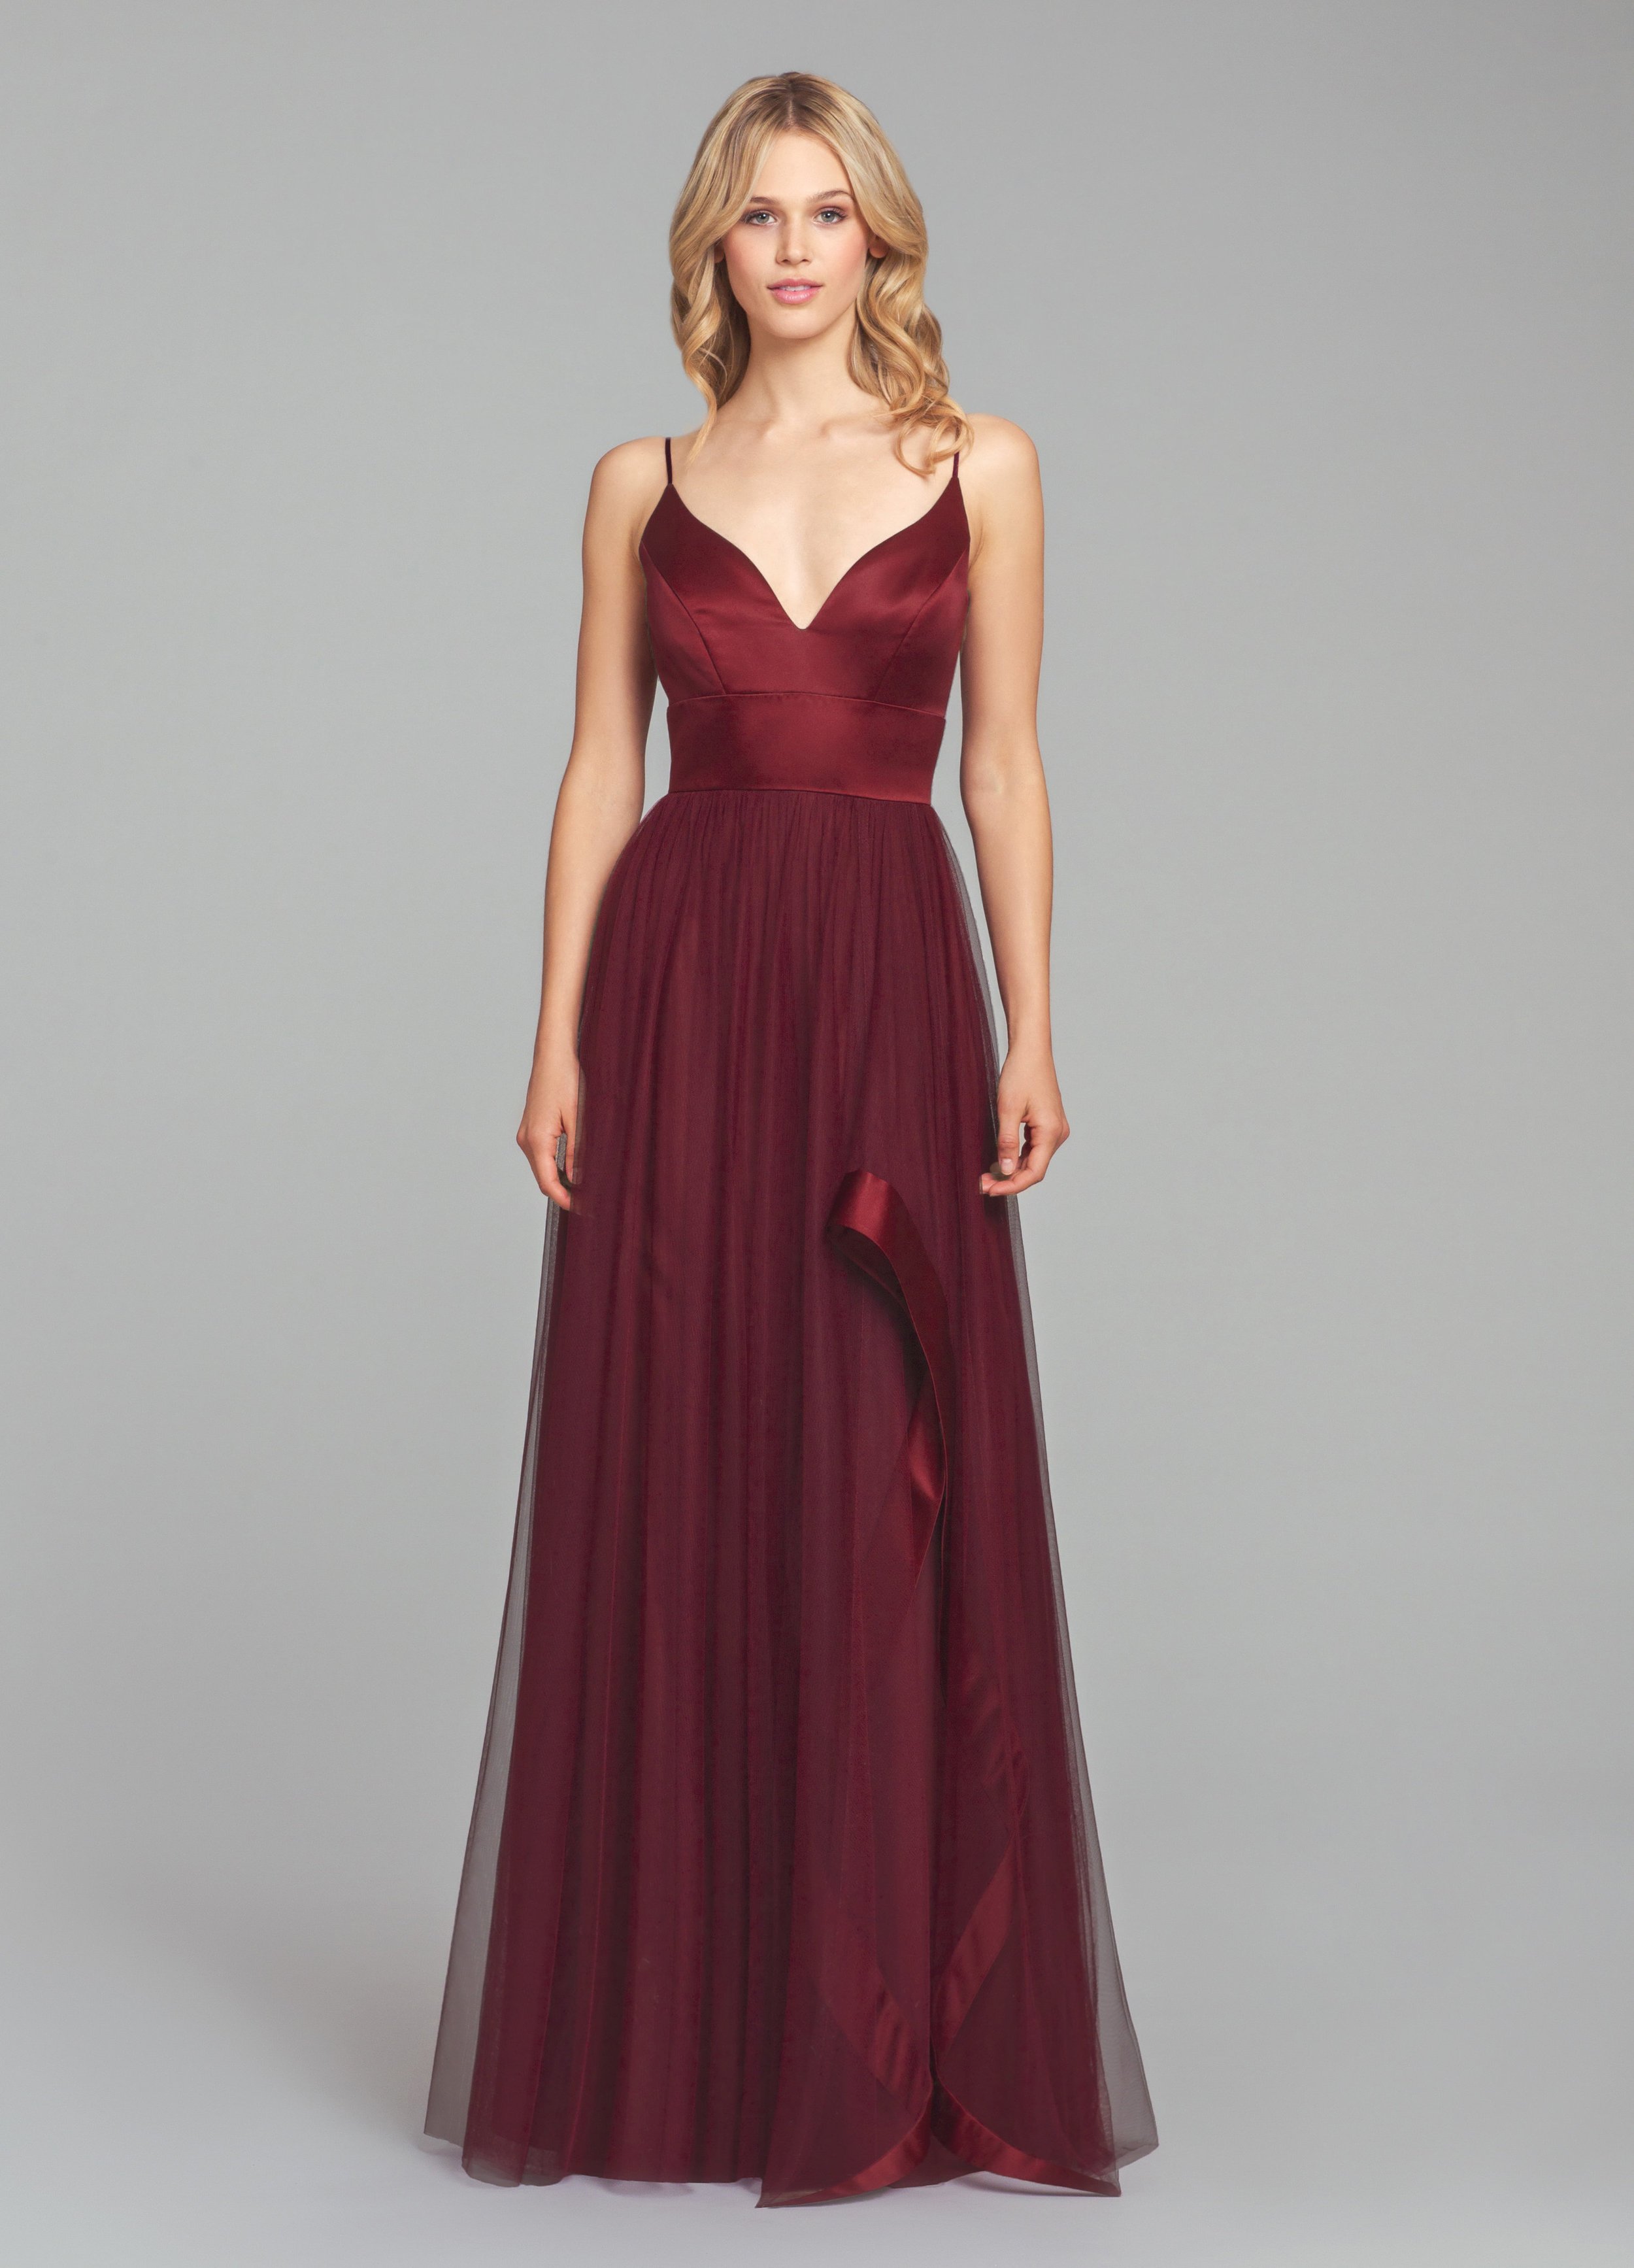 hayley-paige-occasions-bridesmaids-fall-2018-style-5856.jpg